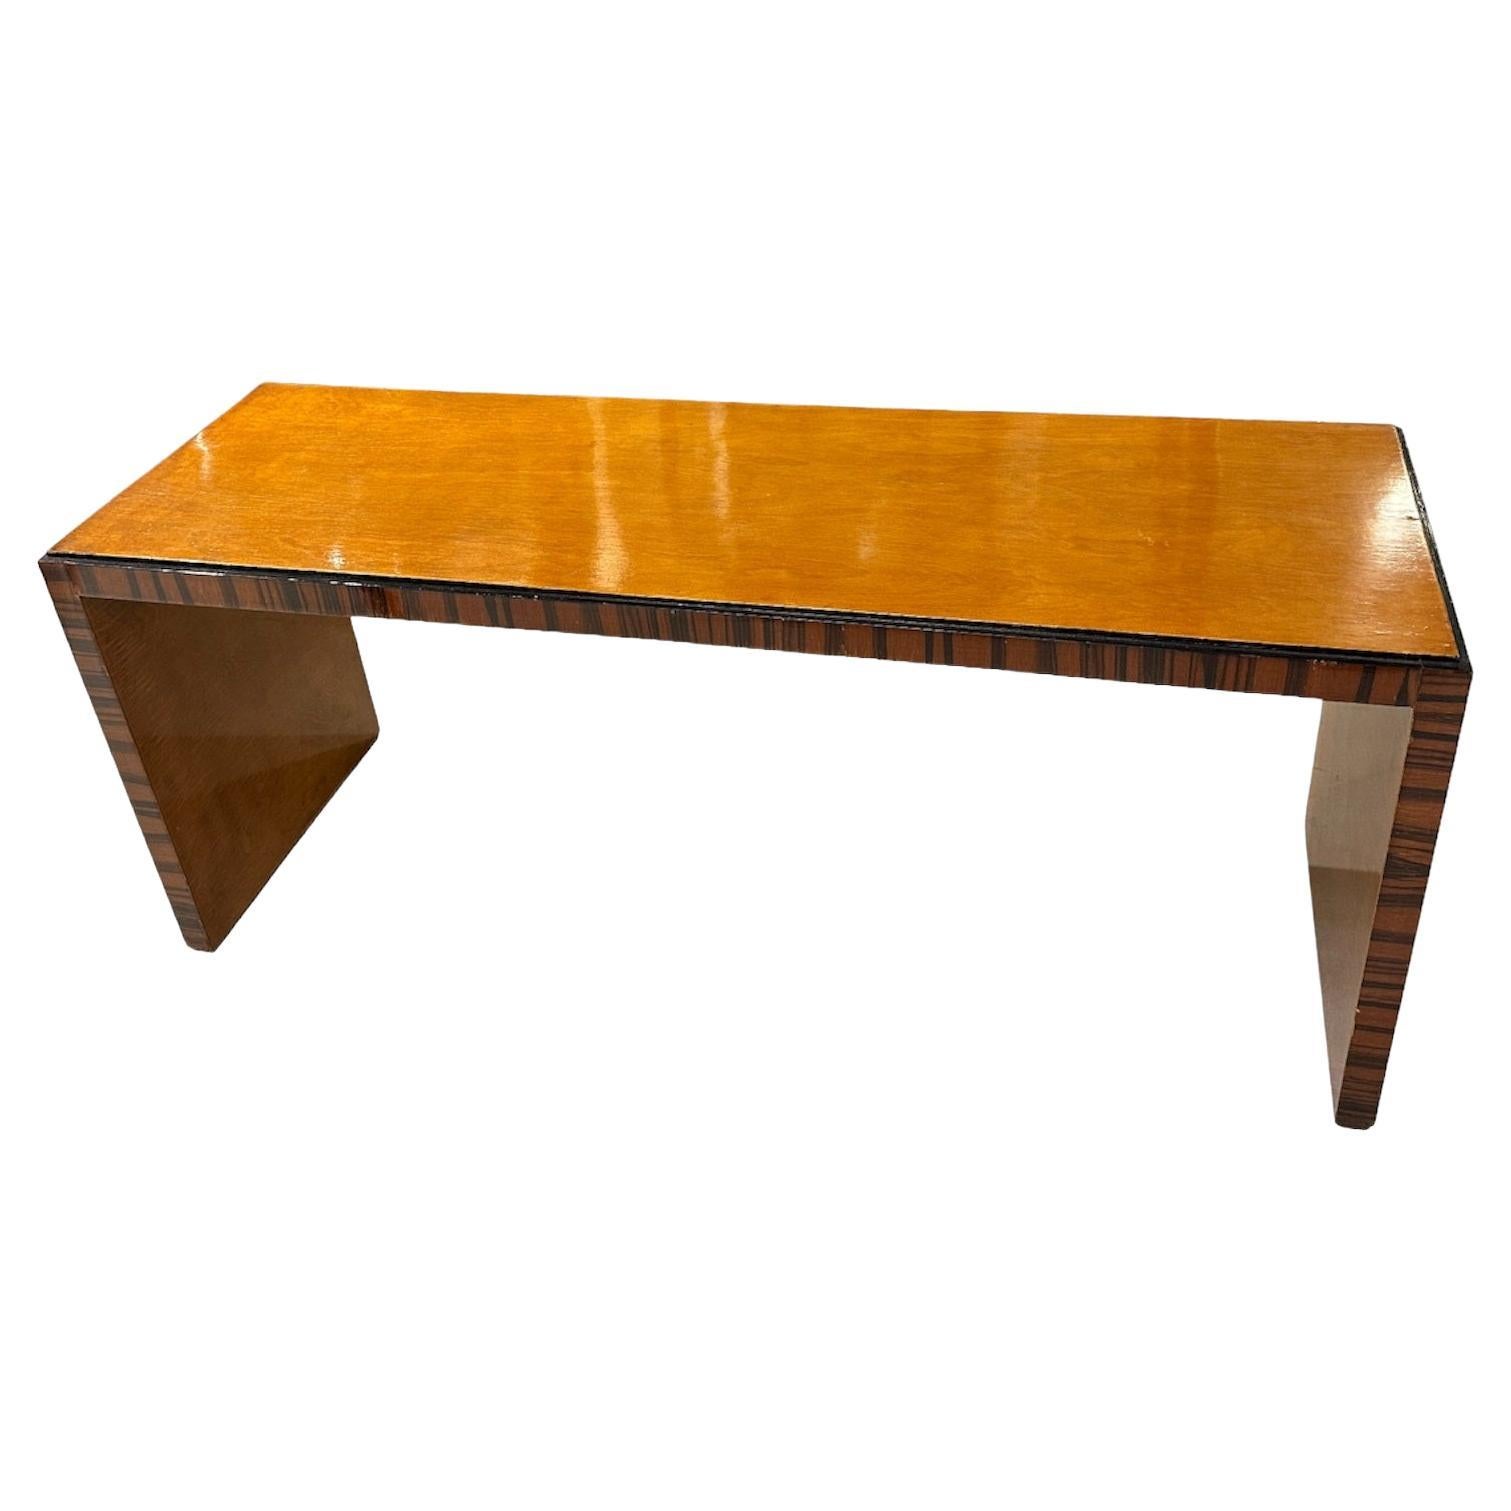 Art Deco Coffe Table in Wood, 1920, France For Sale